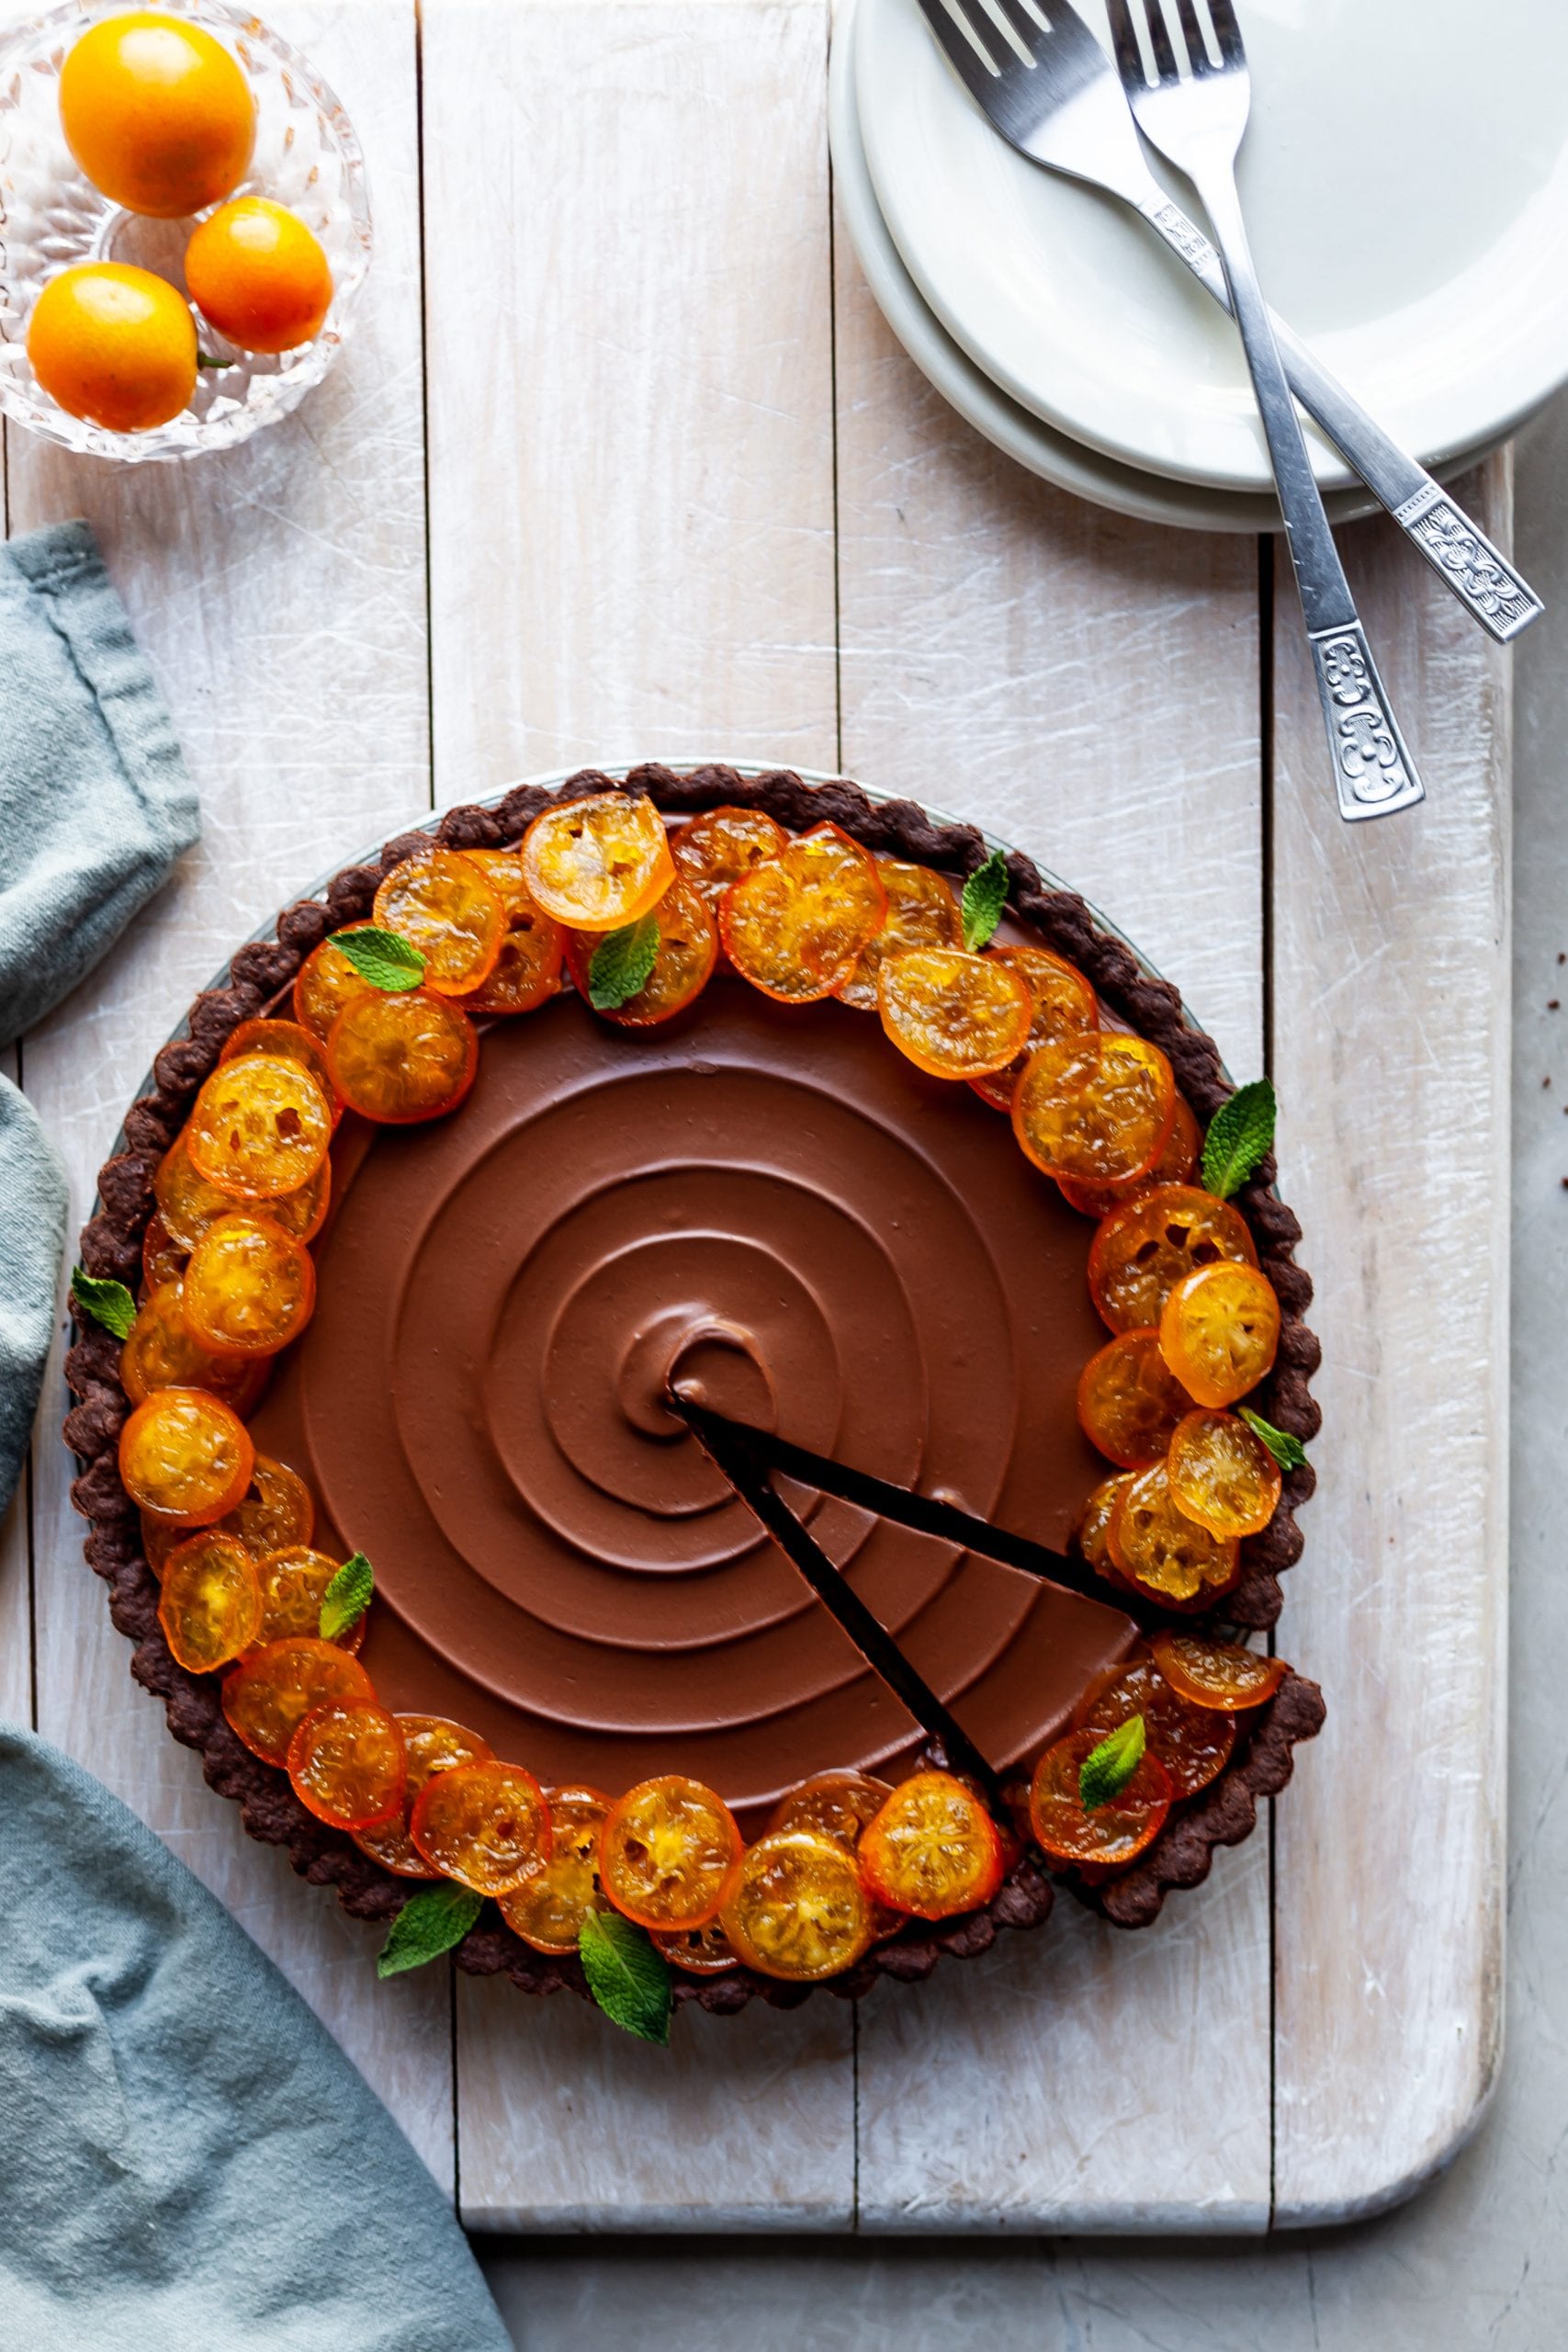 Vegan Chocolate Orange Tart with Candied Kumquats with one slice ready to be served on a white plate